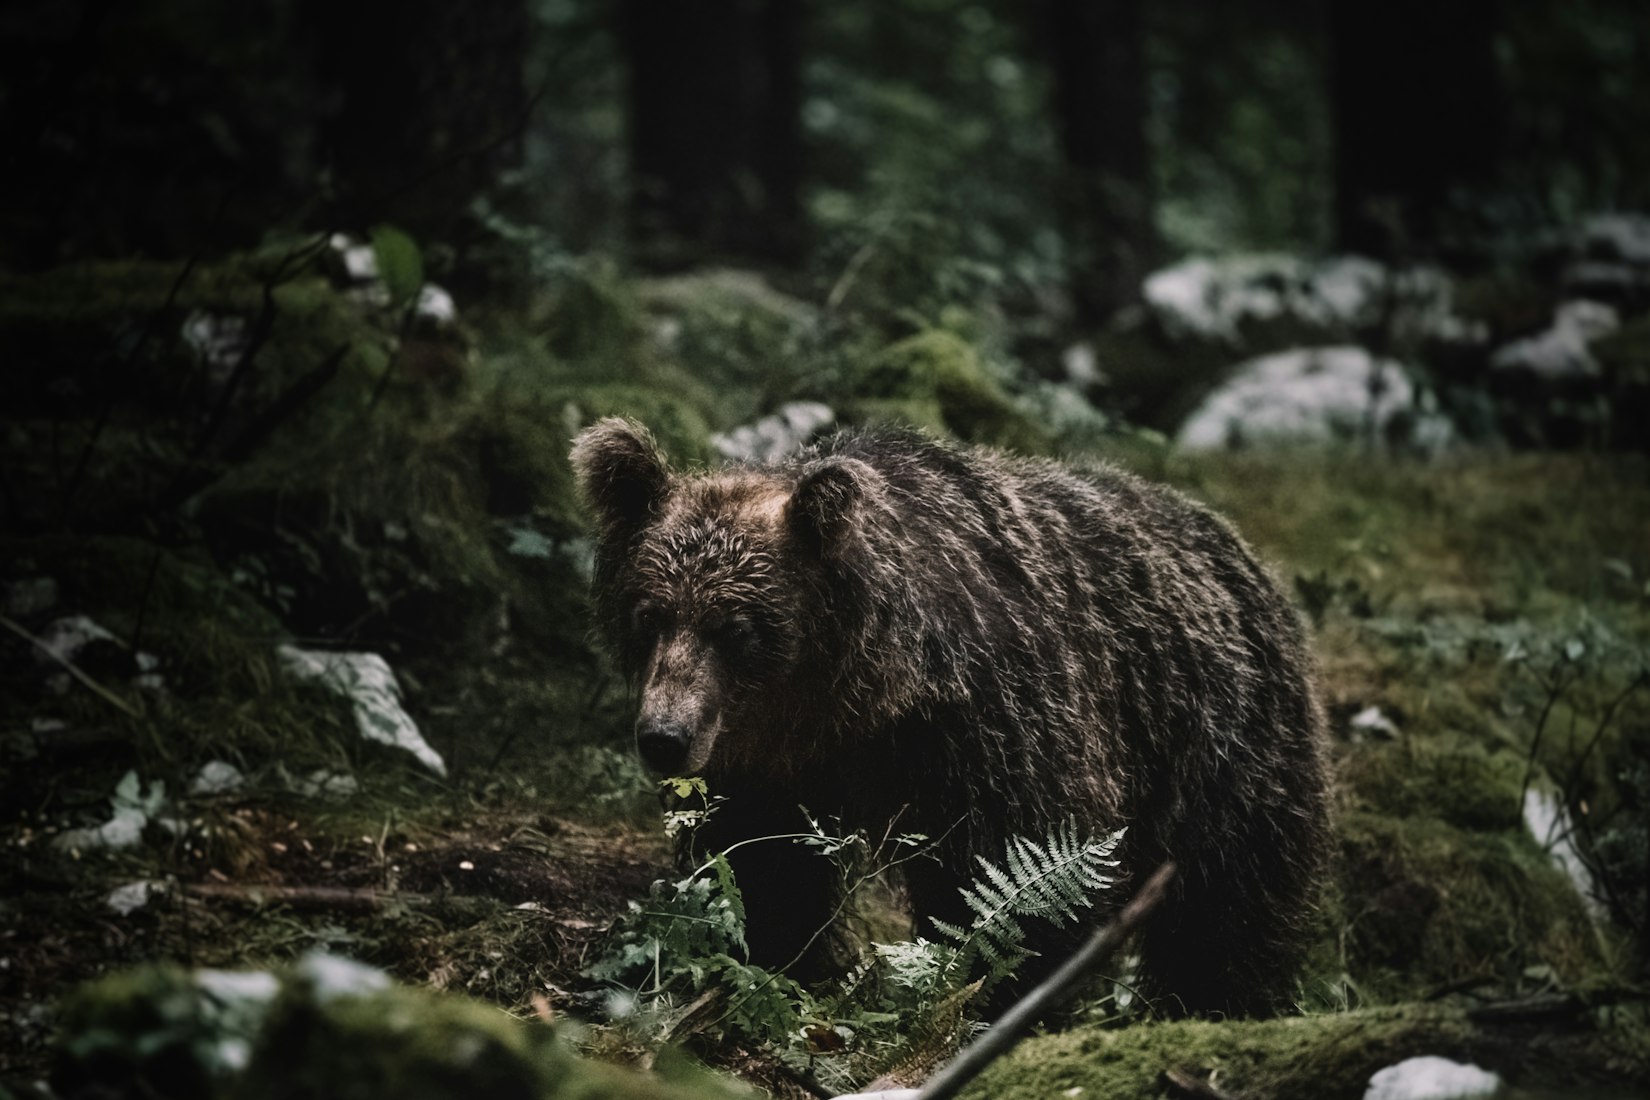 Redefining “Recovery” of Grizzly Bears